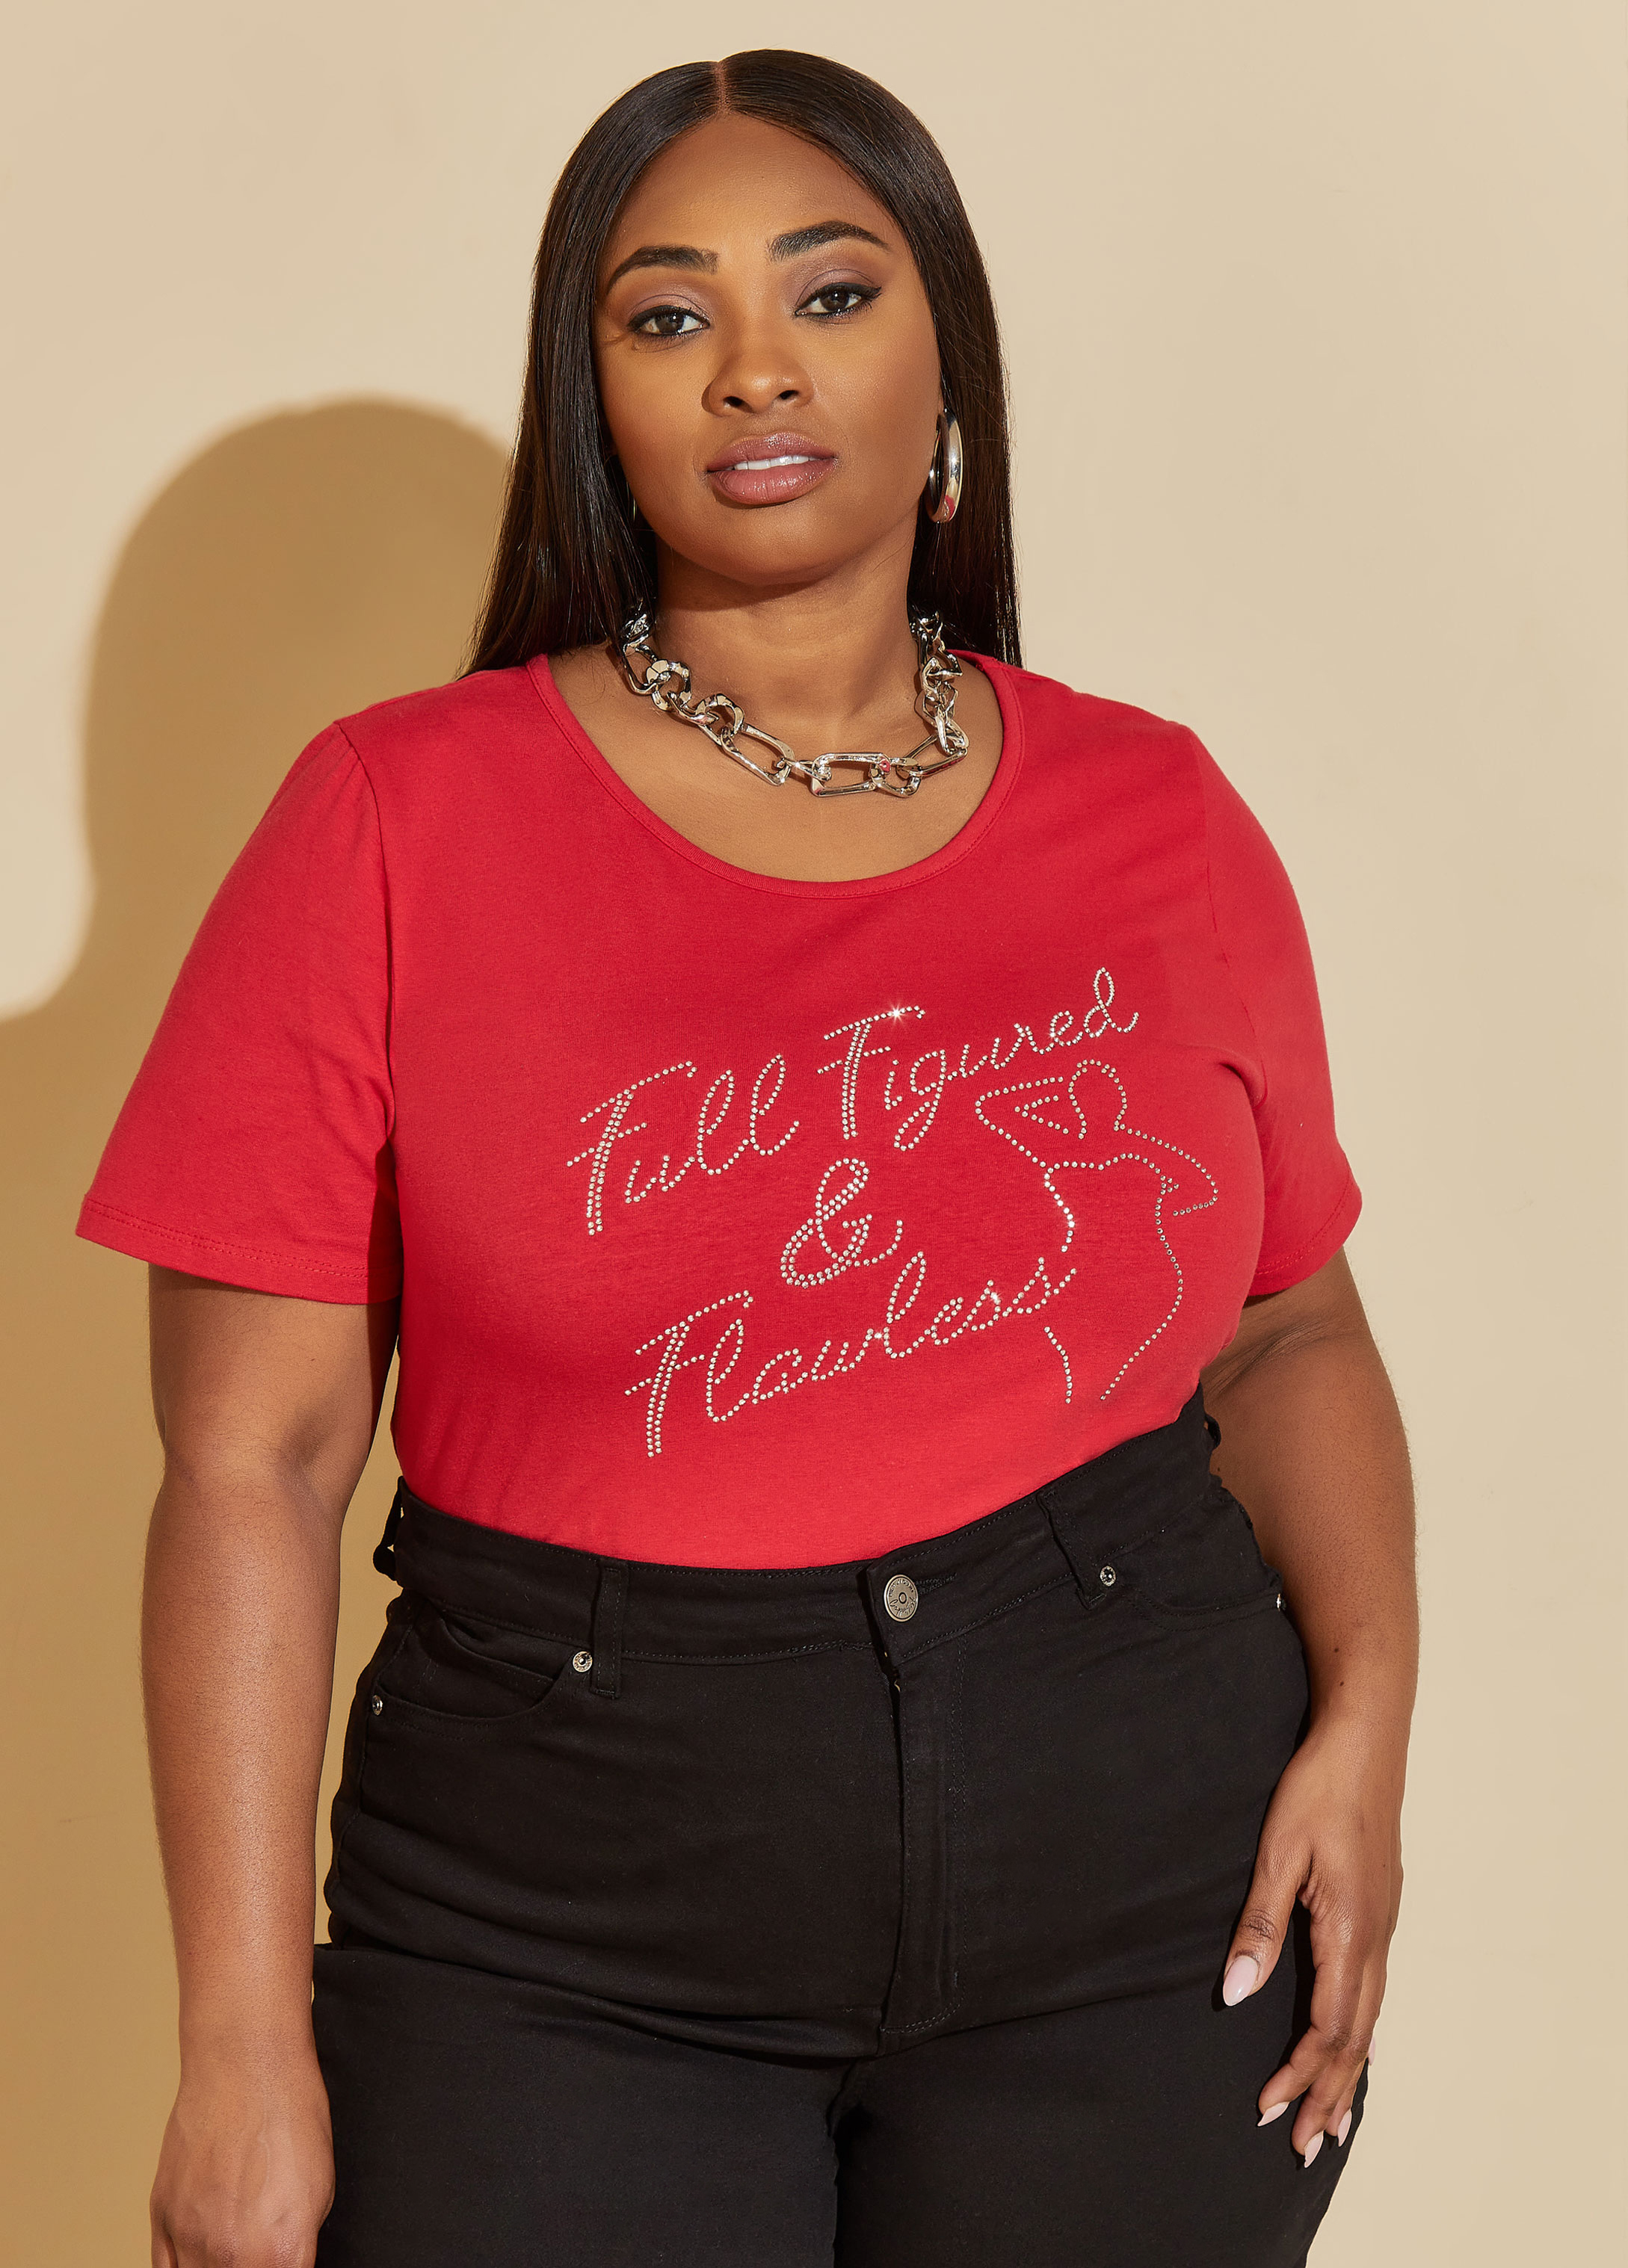 Plus Size tee plus size t-shirt flawless plus size graphic tee